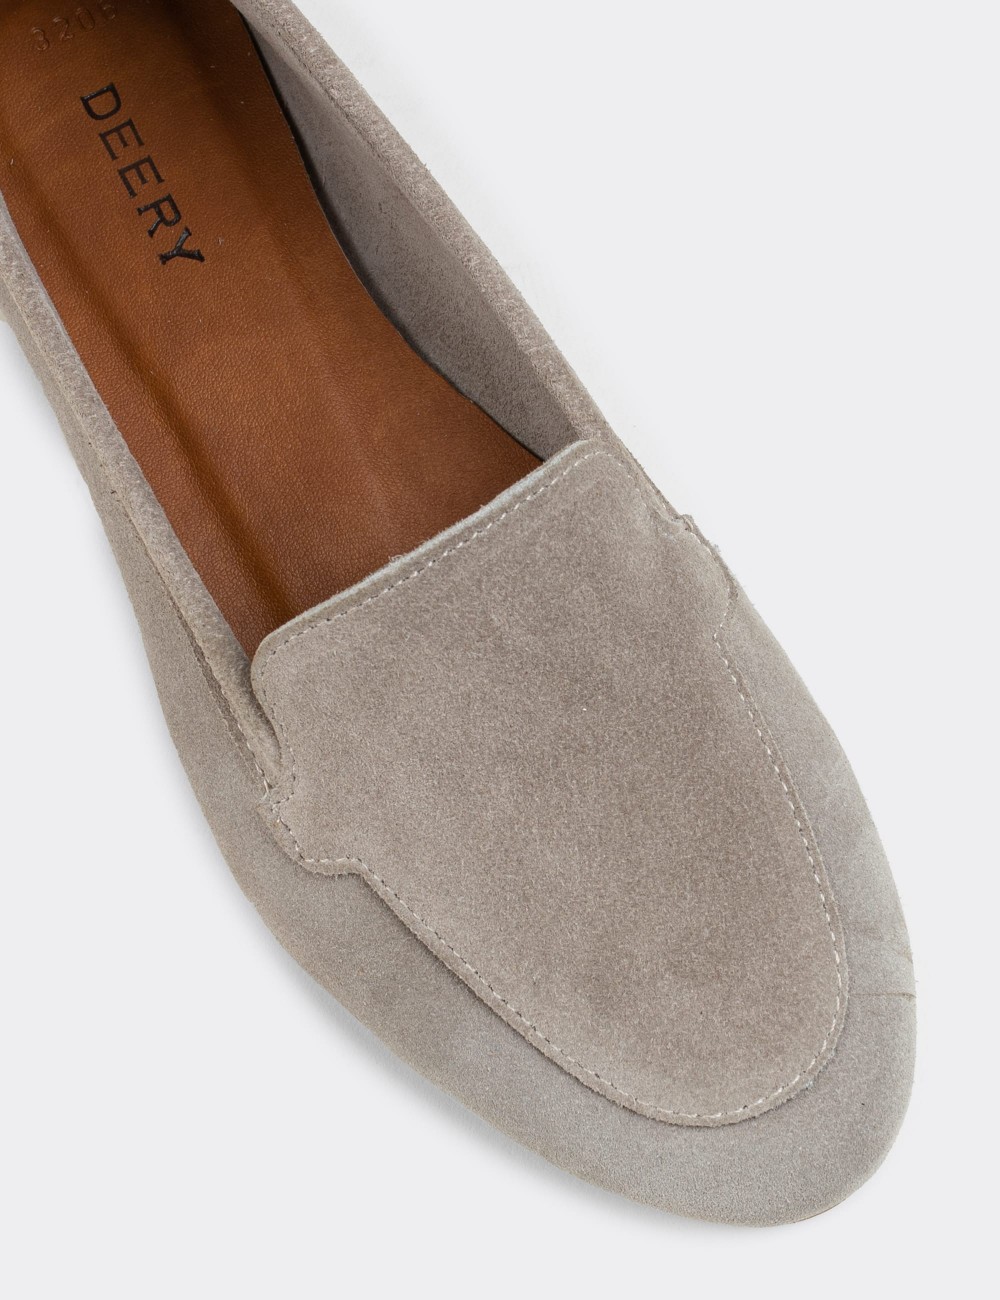 Beige Suede Leather Loafers - E3206ZBEJC01